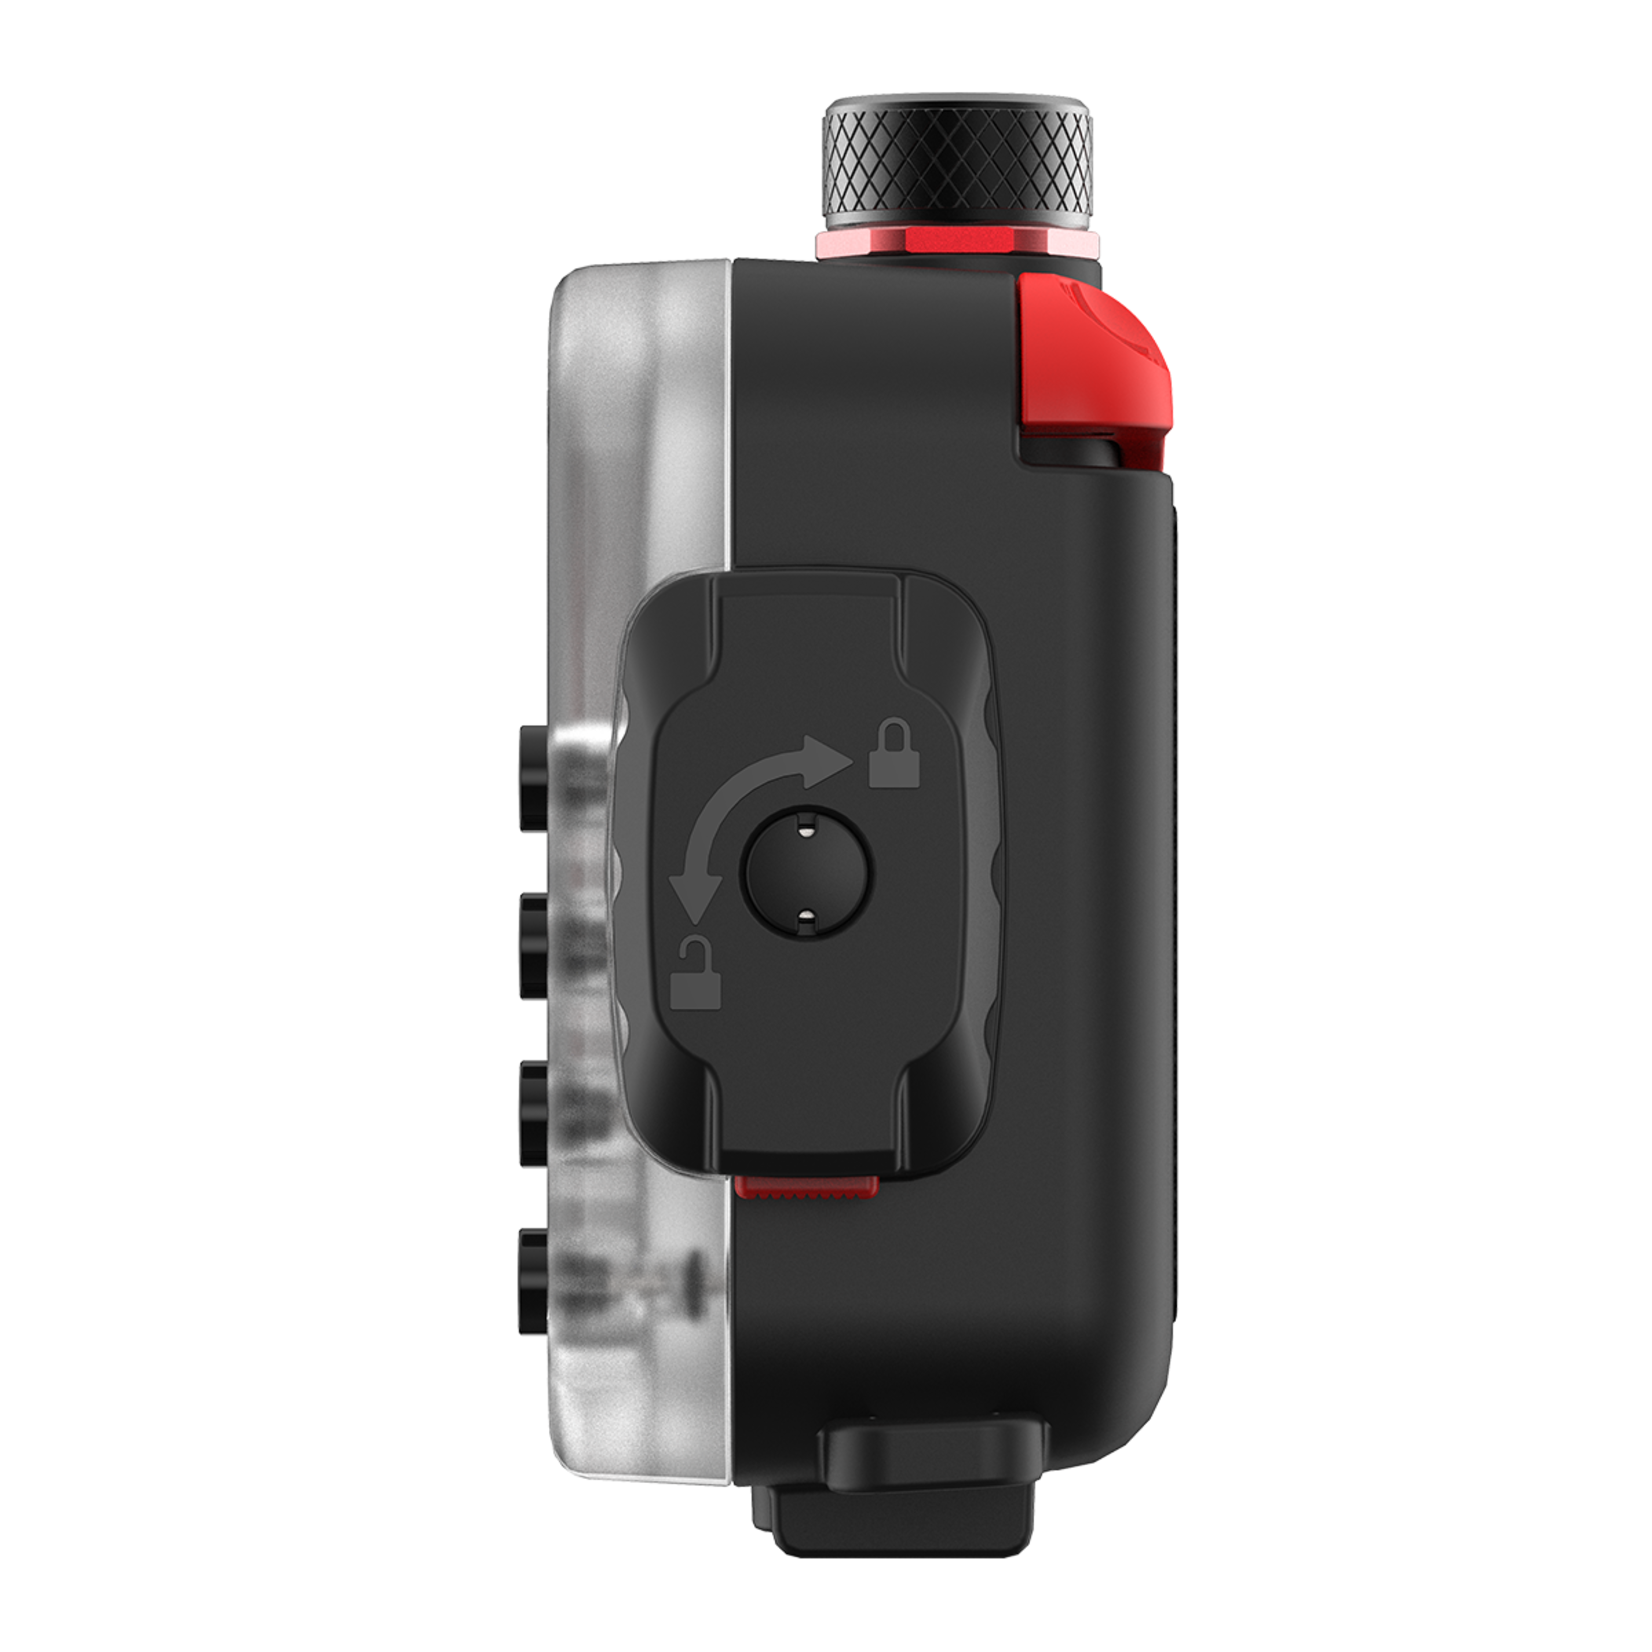 Sealife SportDiver Underwater Housing for Iphone and Android